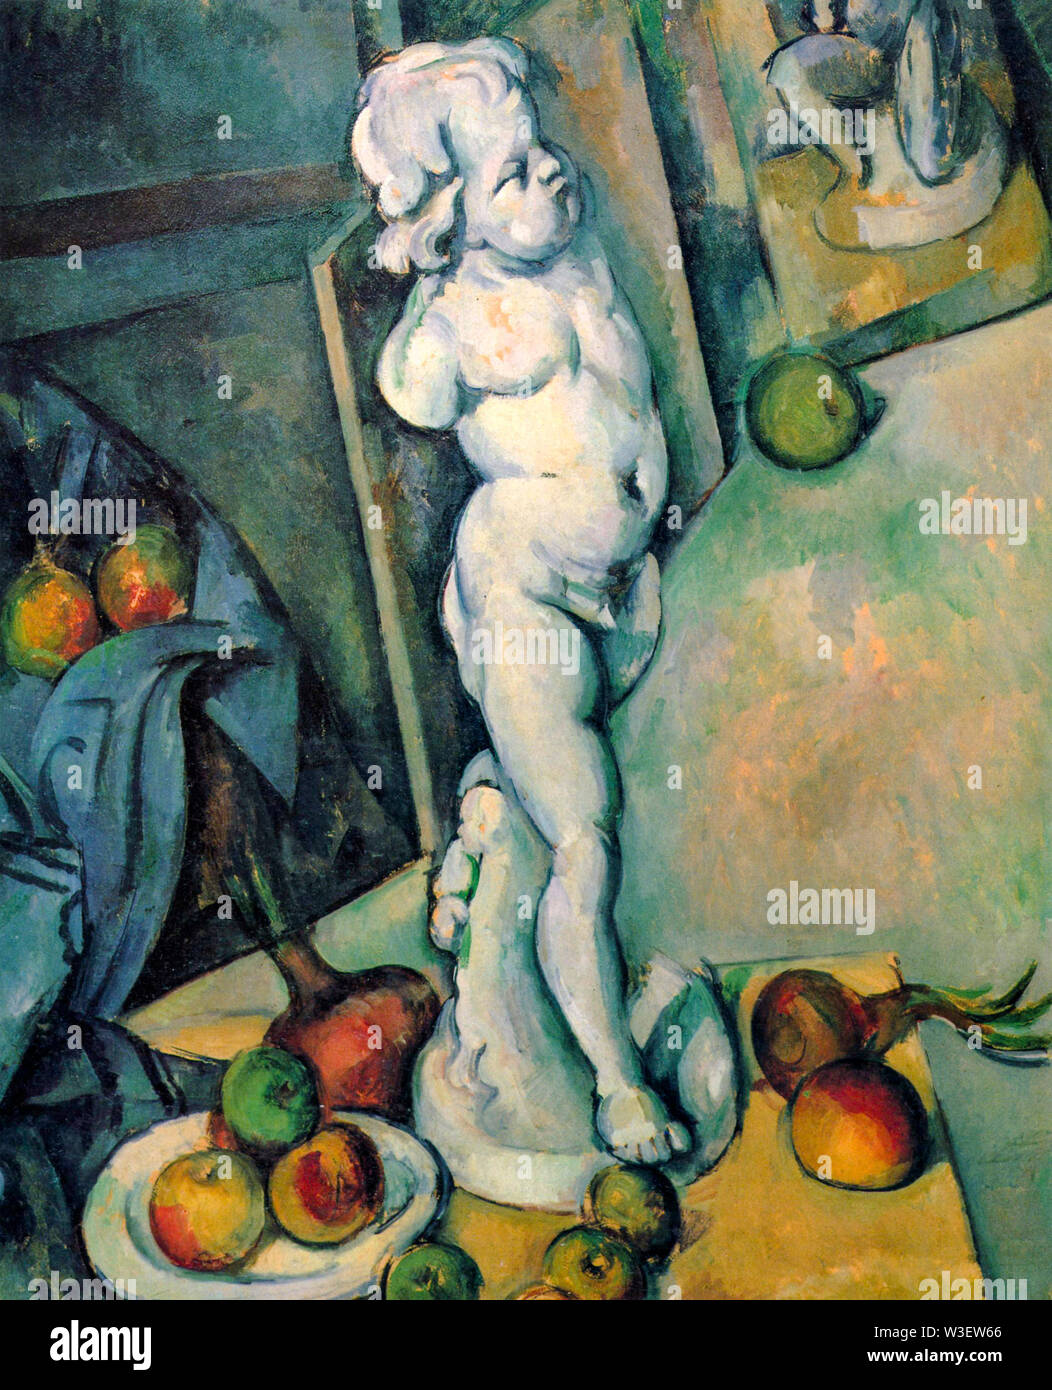 Paul Cézanne, Still Life with Plaster Cupid, still life painting, 1895 Stock Photo